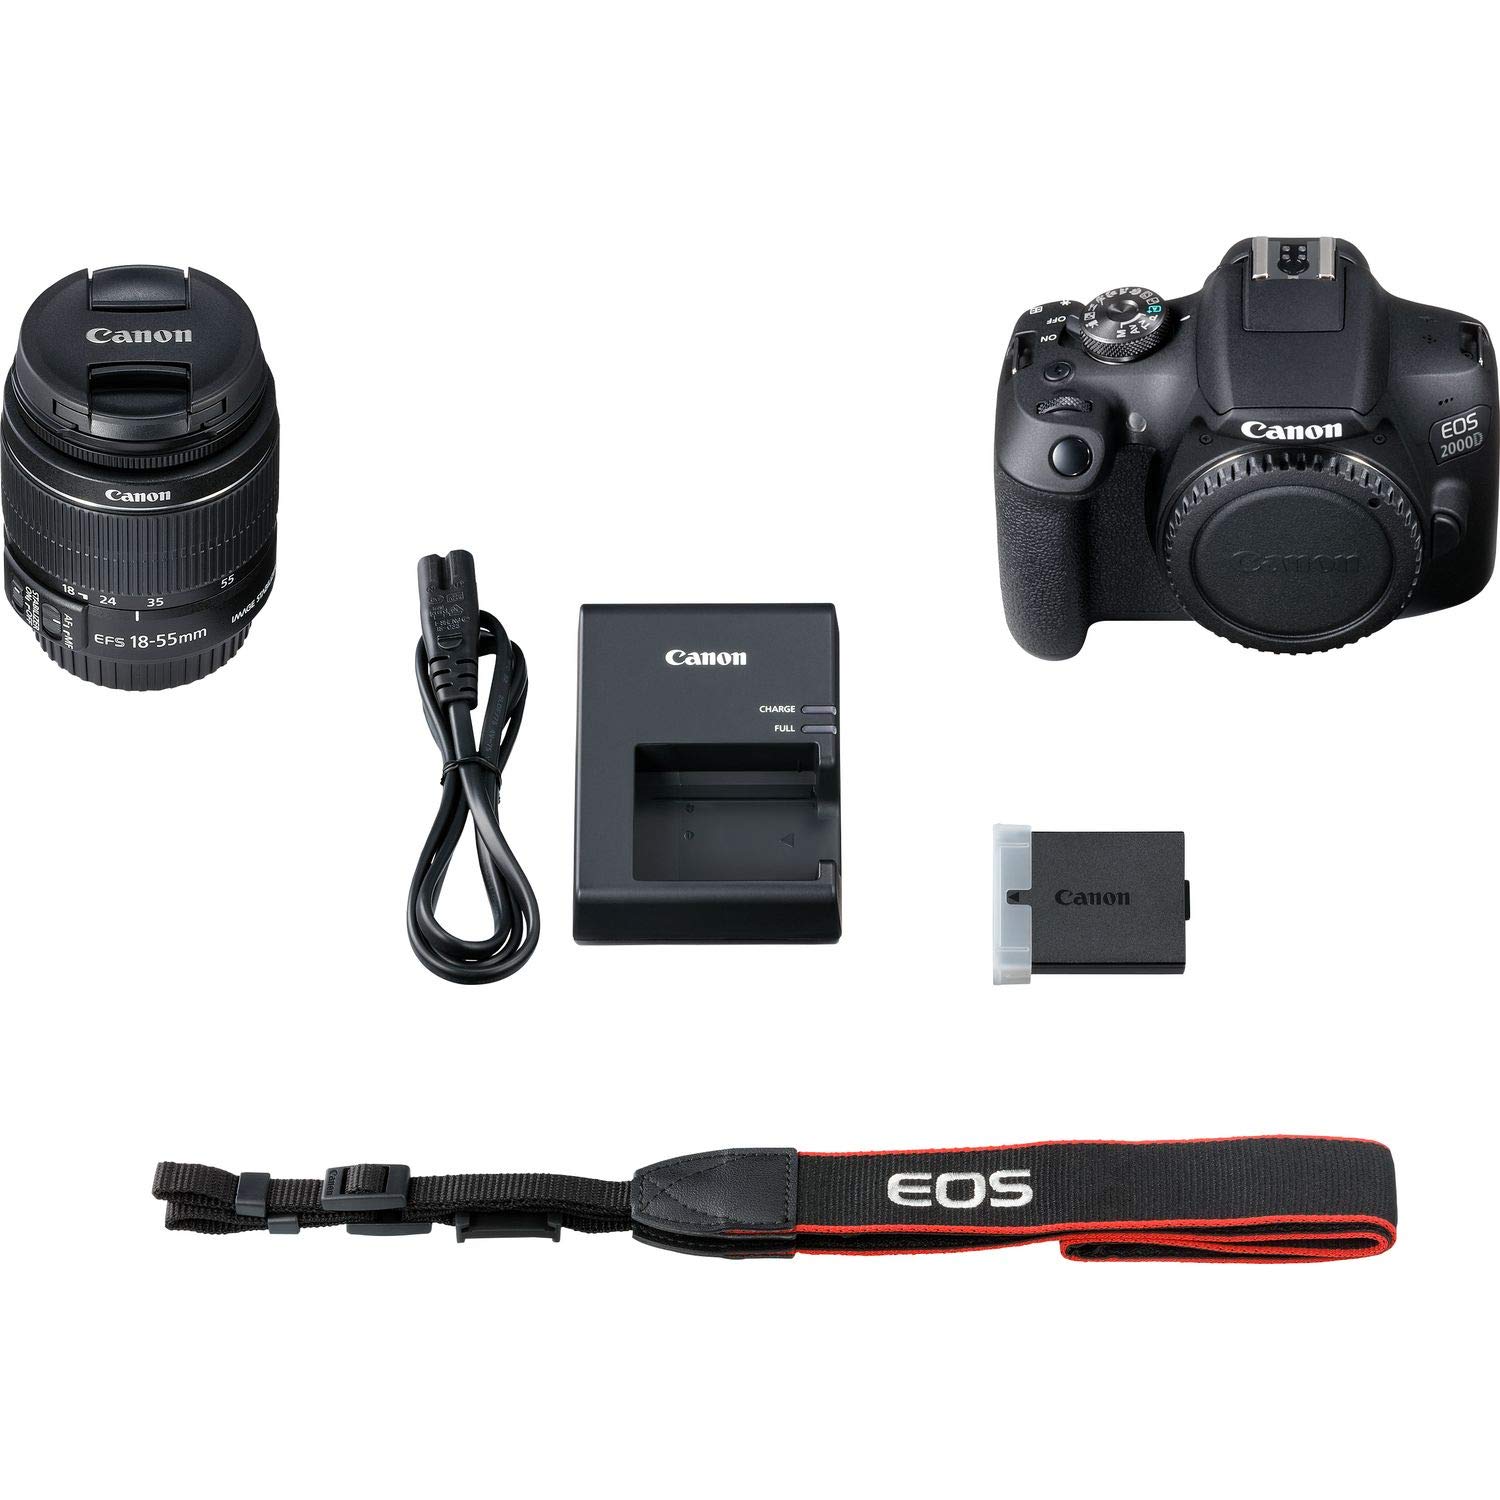 Canon EOS 2000D / Rebel T7 Digital SLR Camera Body with Canon EF-S 18-55mm f/3.5-5.6 Lens & 500mm Telephoto DSLR Kit 64GB Card Complete Accessory Bundle + Flash & More - International Model (Renewed)